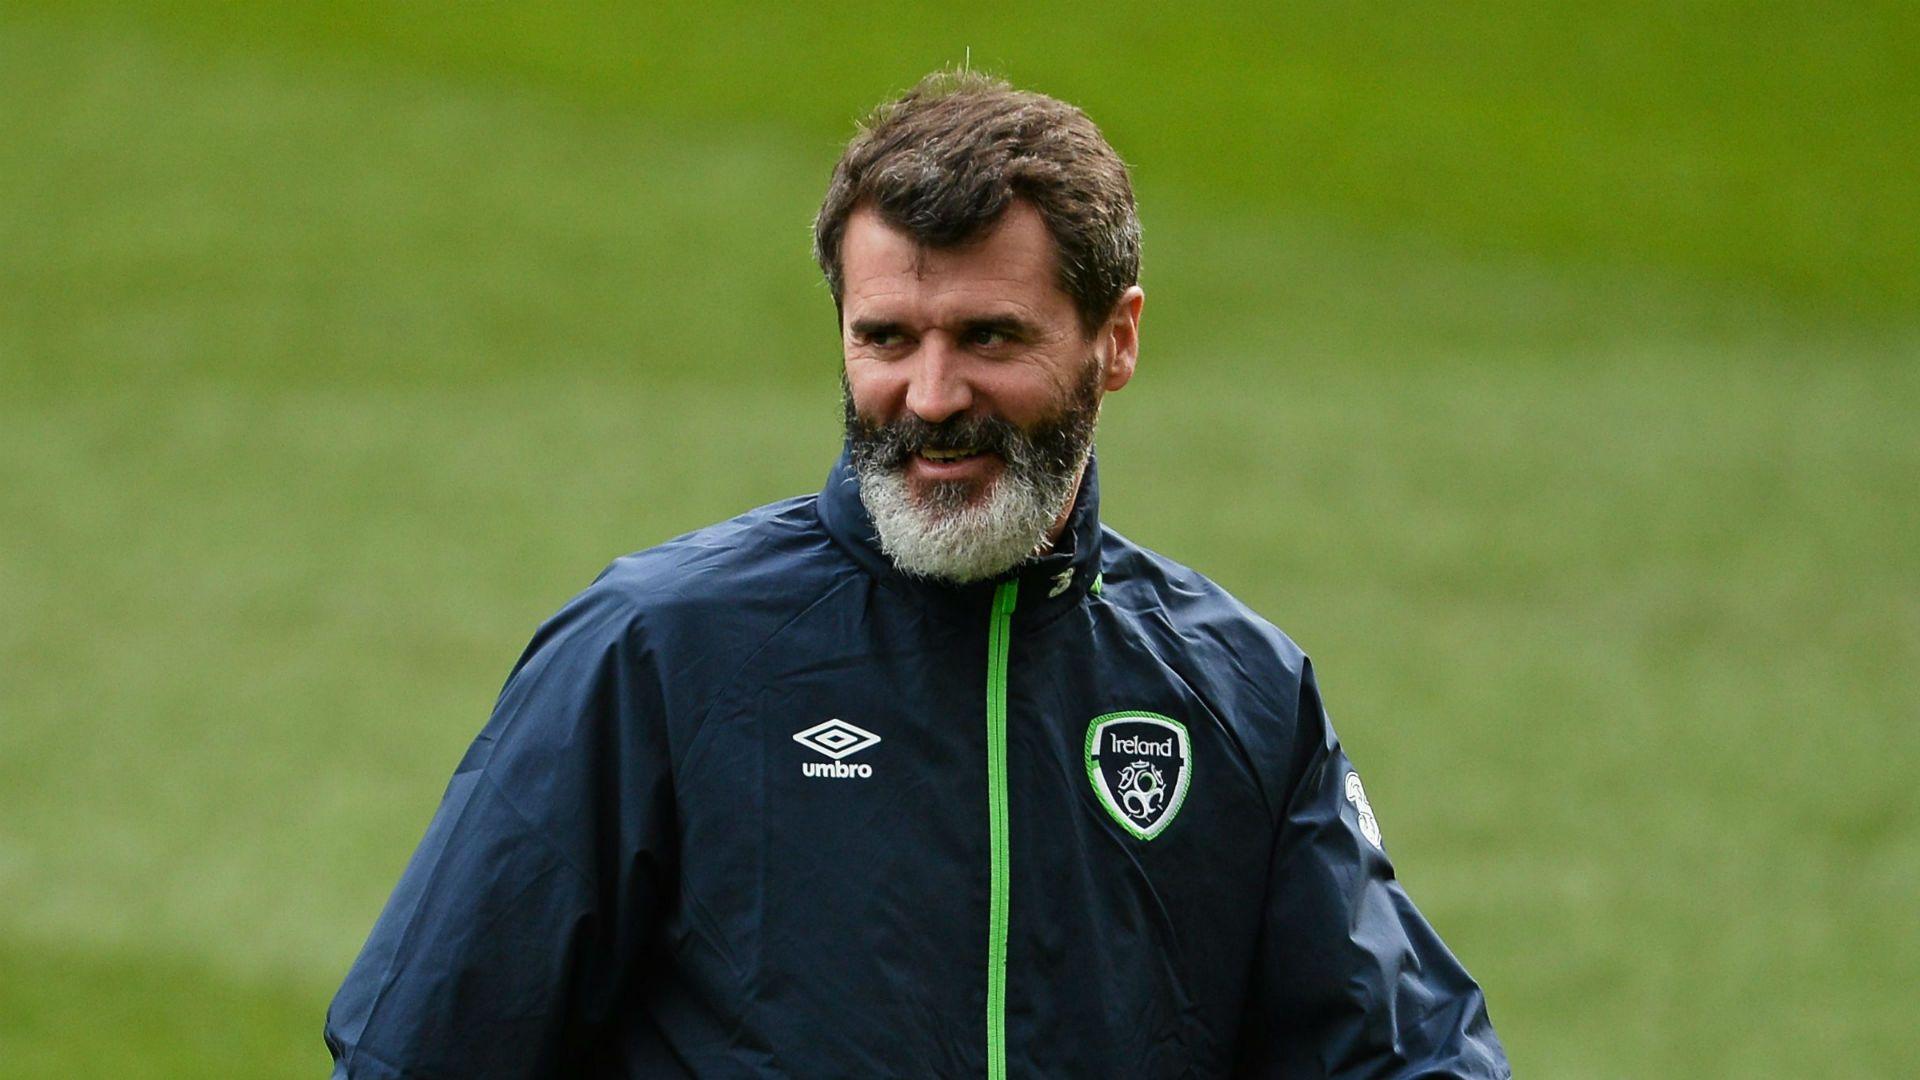 Roy Keane still at war with a world he can't understand